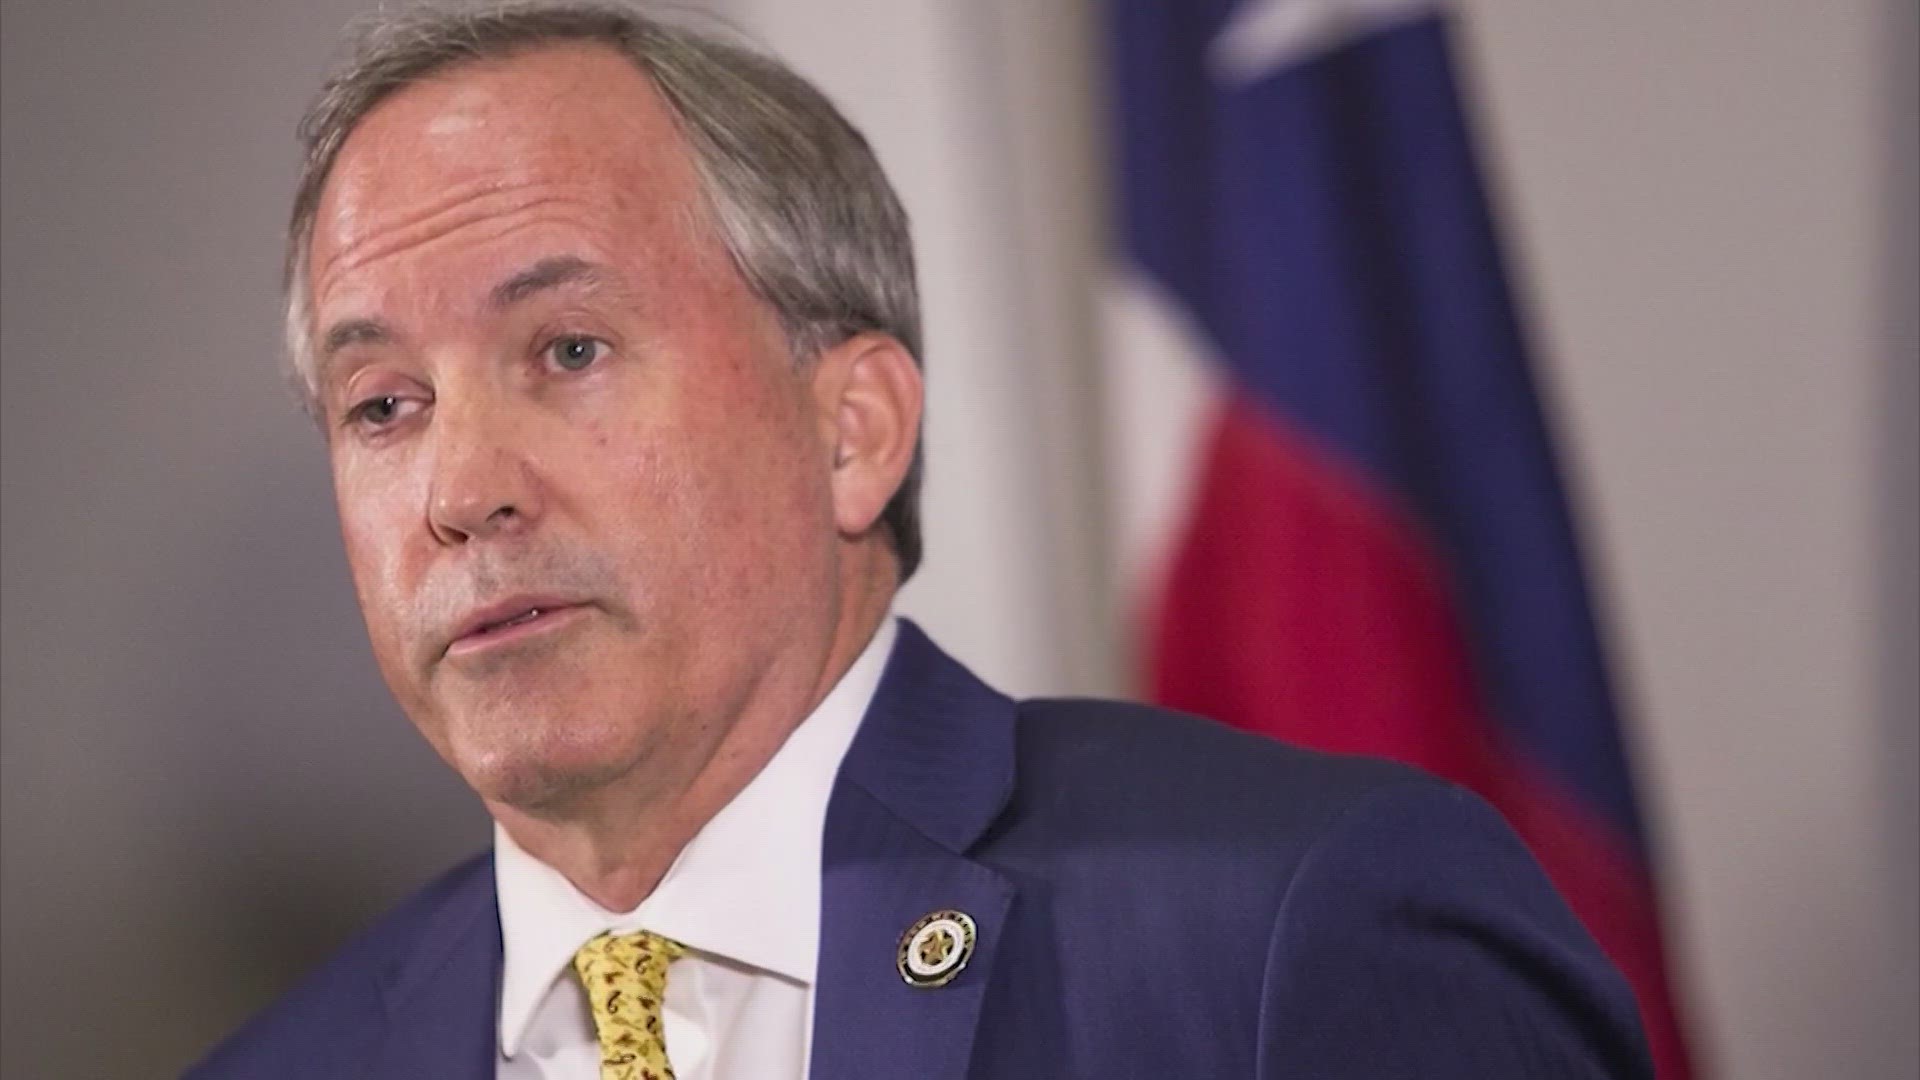 The state's top lawyer is now on the brink of impeachment. We break down the accusations against Texas Attorney General Ken Paxton.